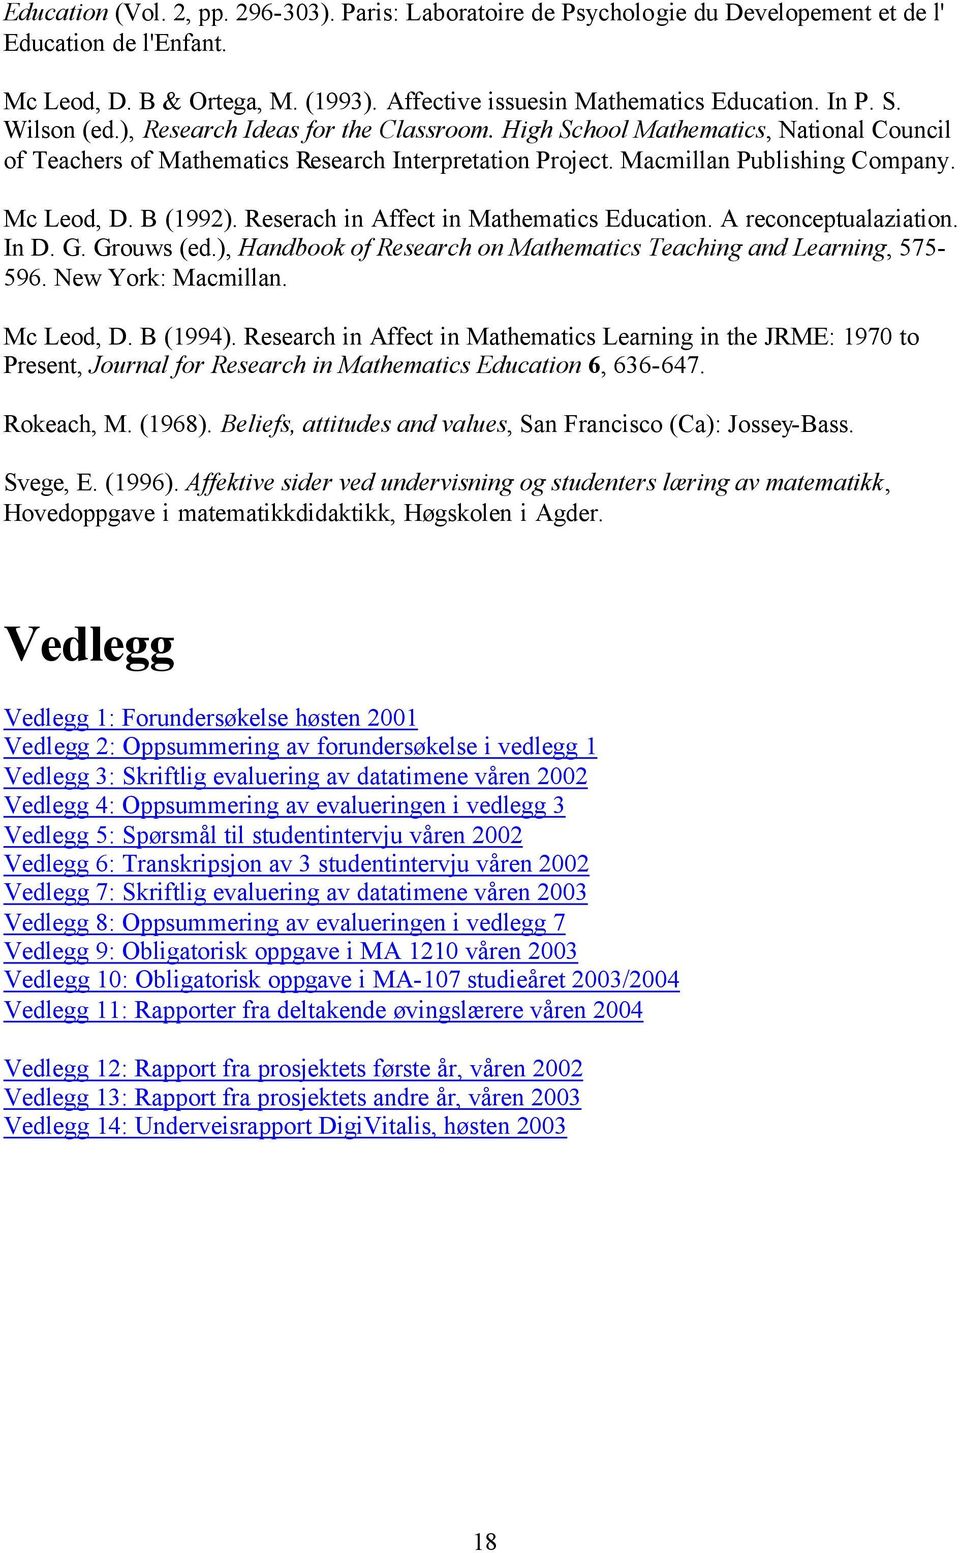 B (1992). Reserach in Affect in Mathematics Education. A reconceptualaziation. In D. G. Grouws (ed.), Handbook of Research on Mathematics Teaching and Learning, 575-596. New York: Macmillan.